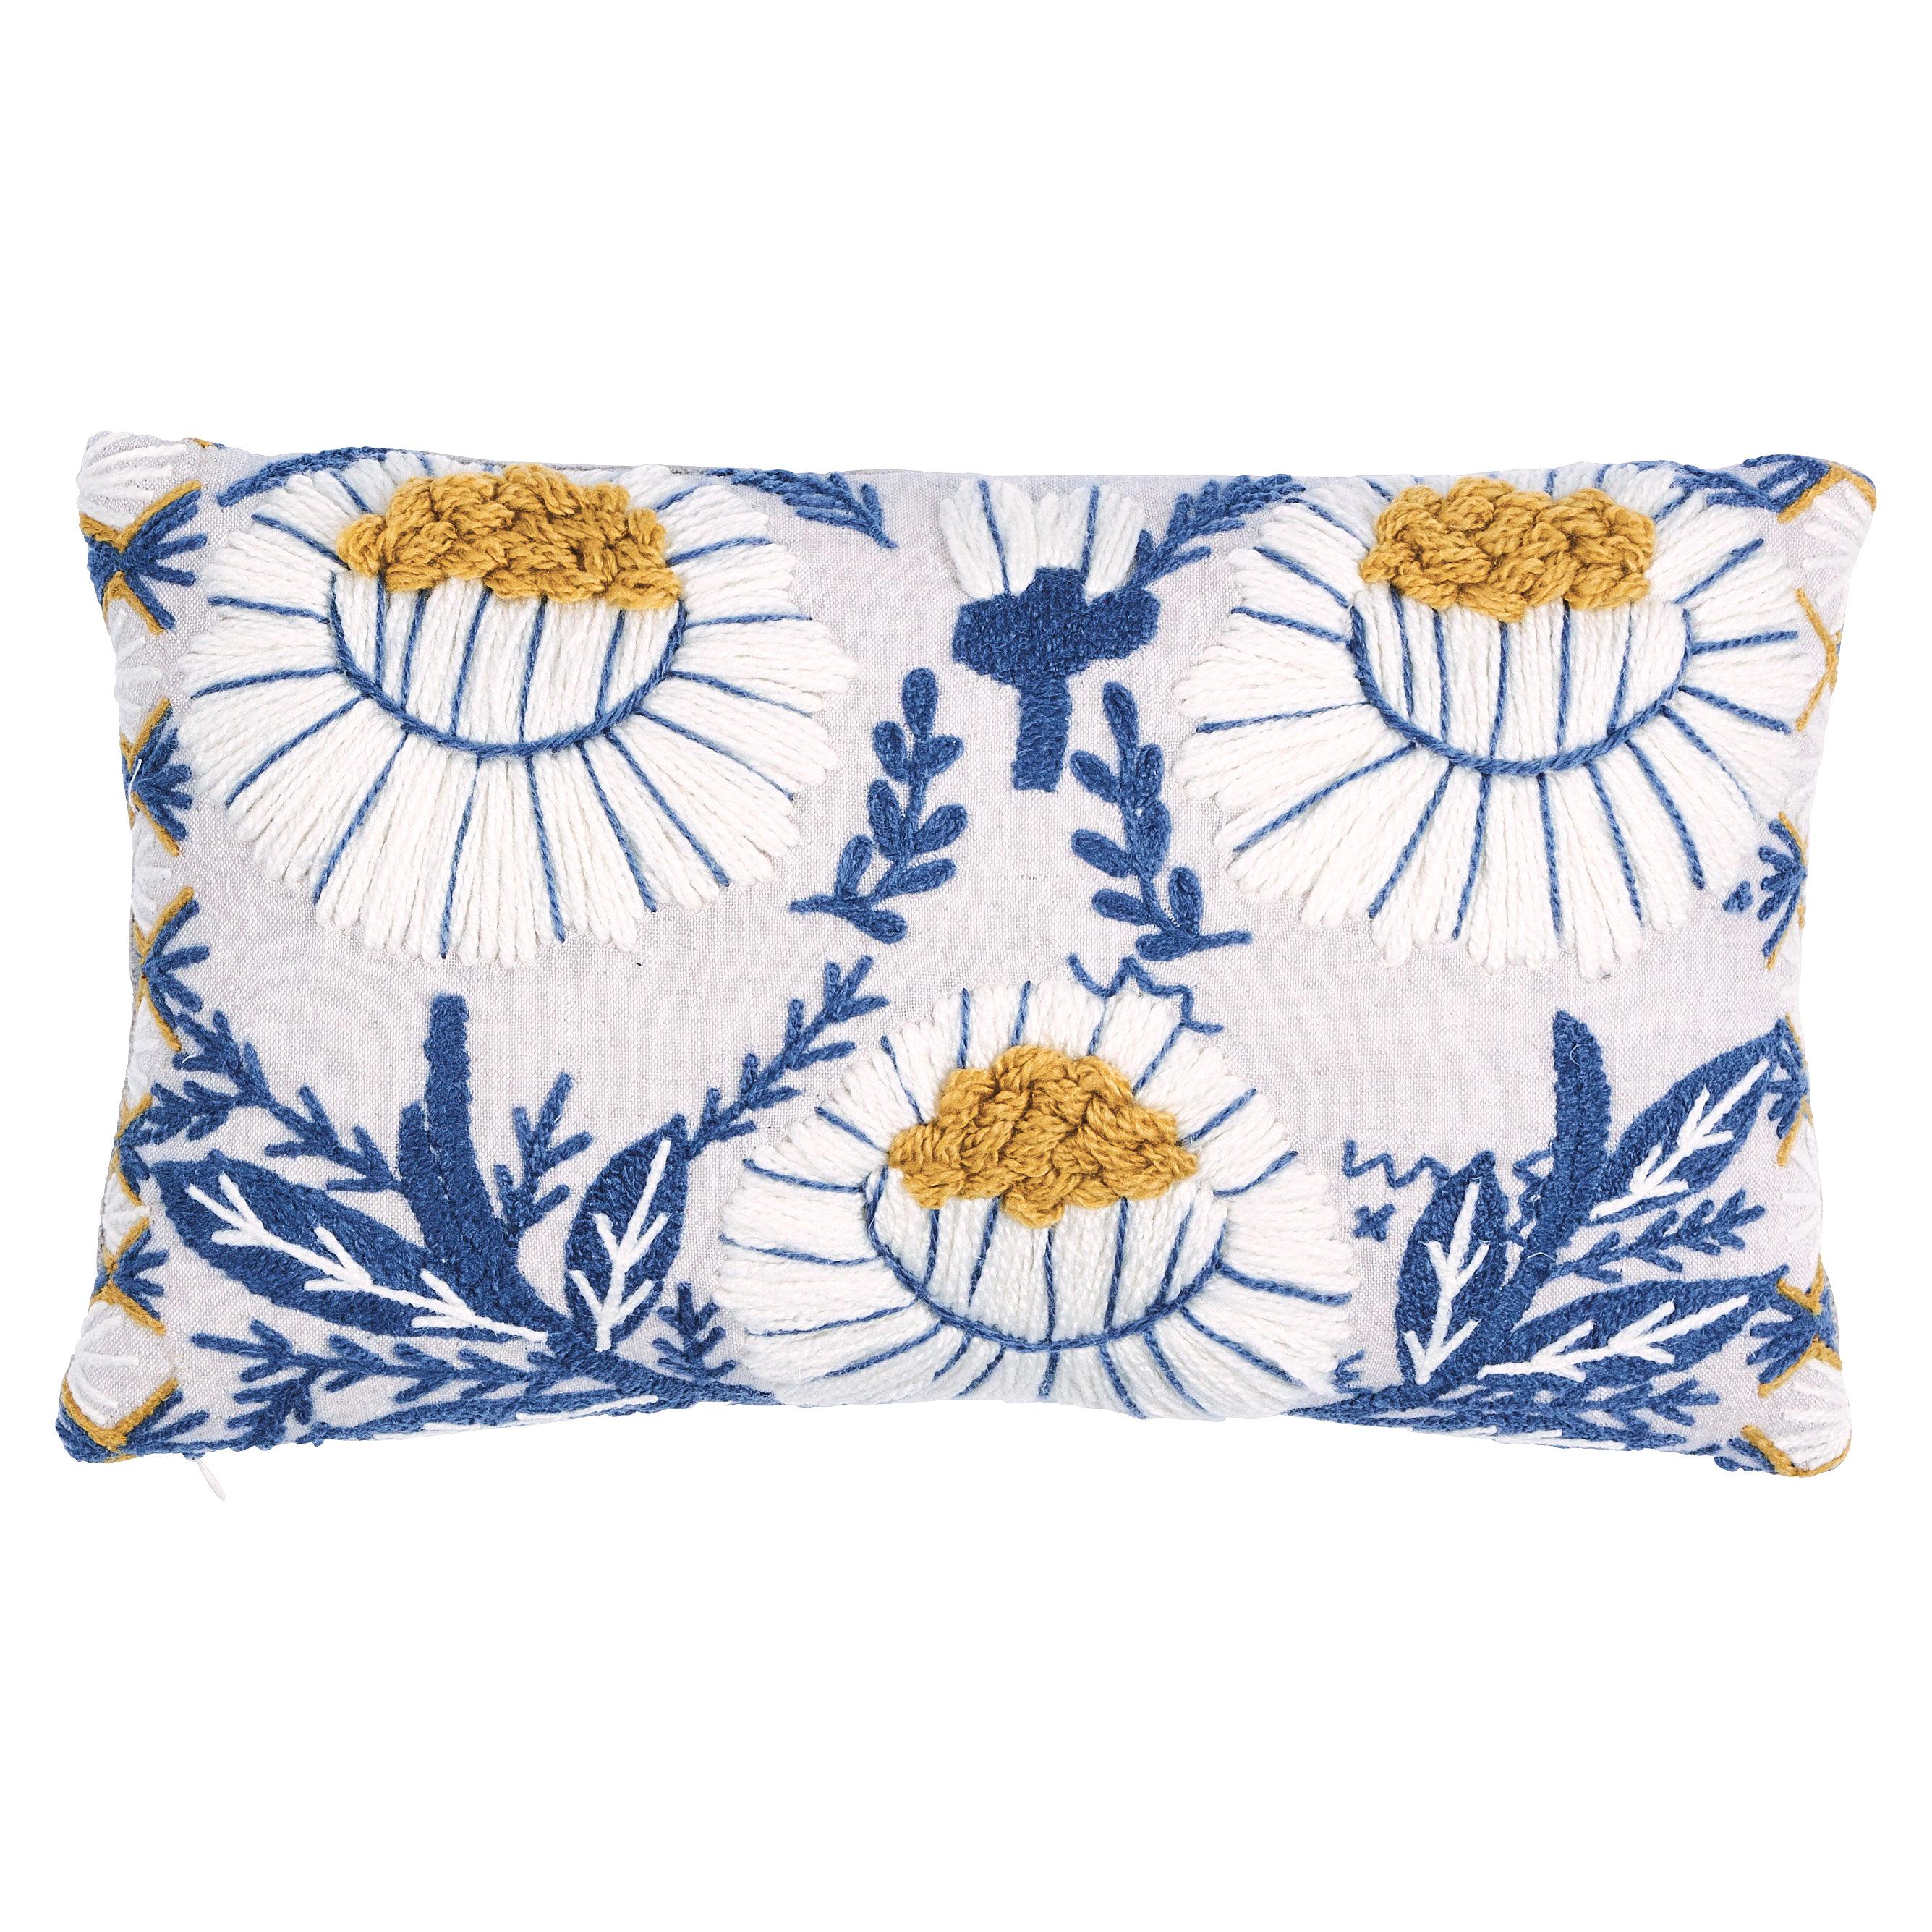 Schumacher Marguerite Embroidery Pillow in Blue & Ochre For Sale